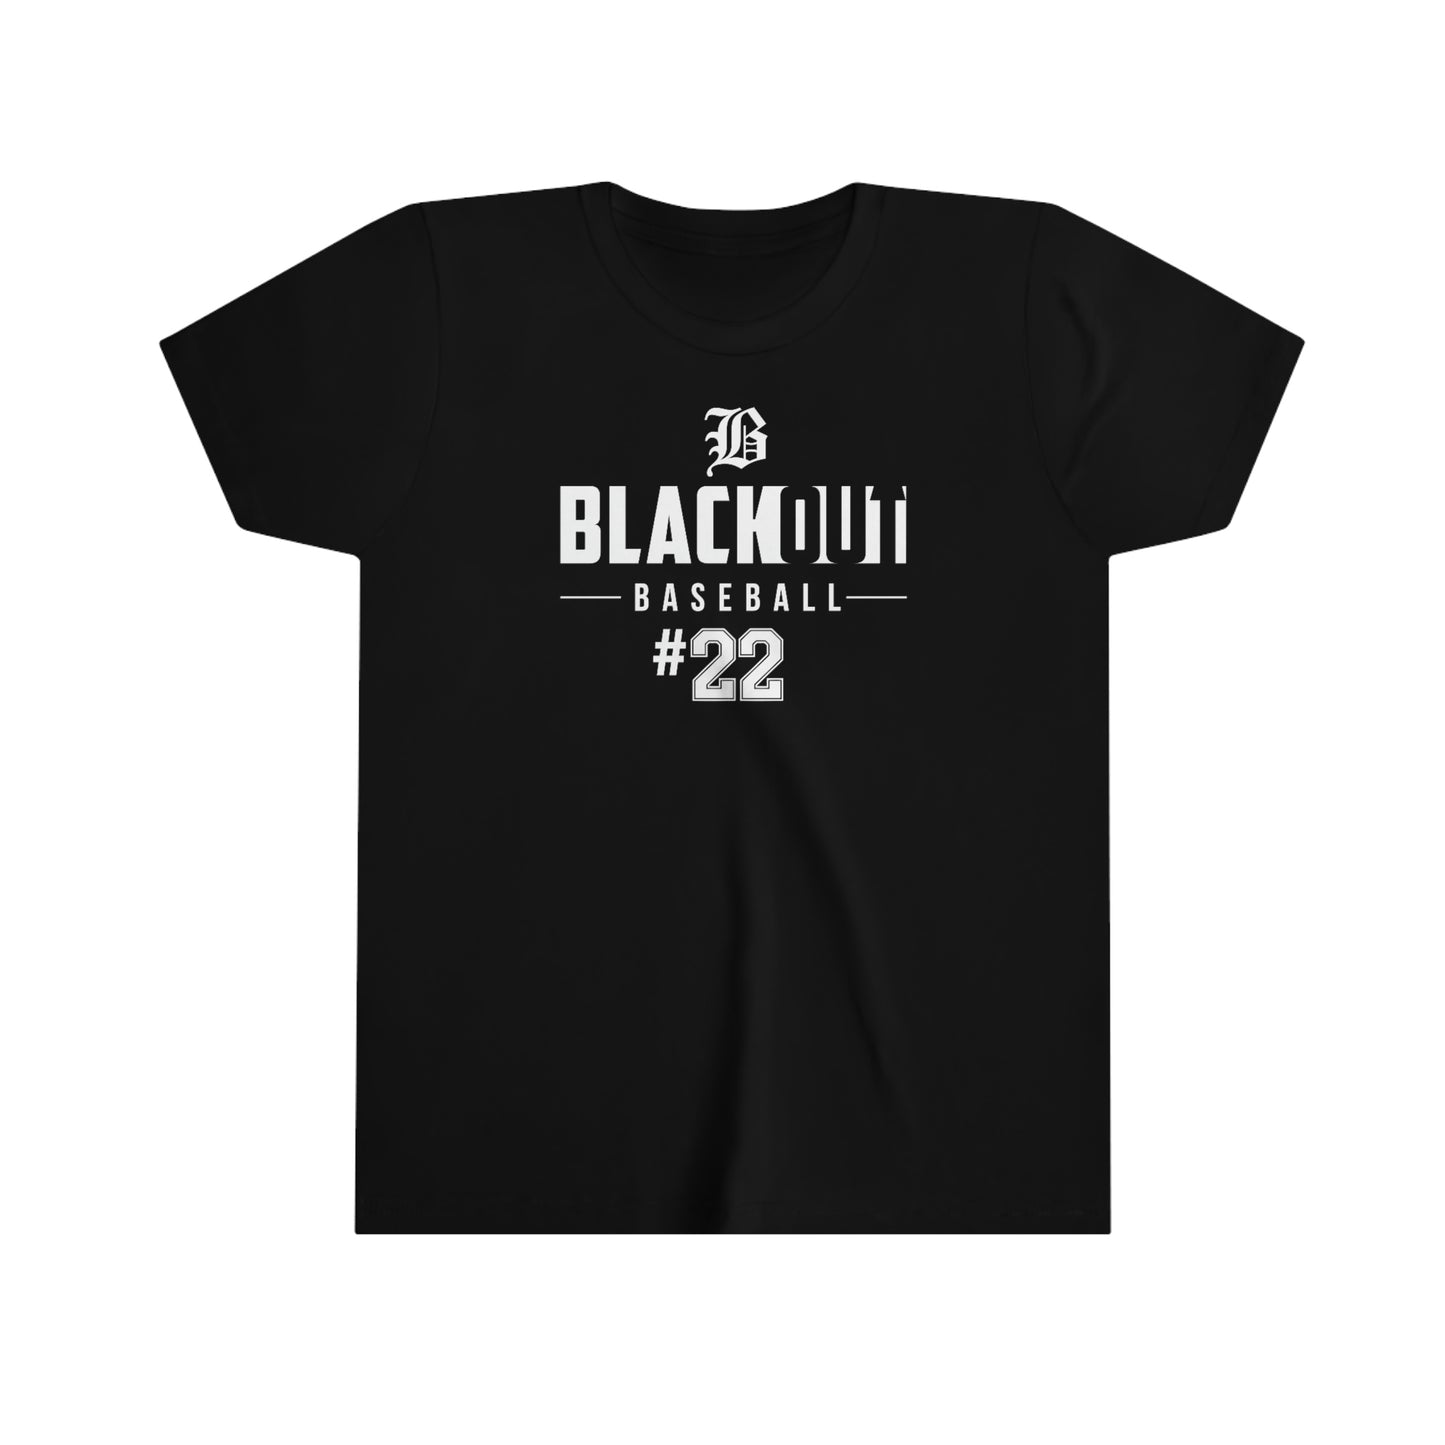 YOUTH - PERSONALIZED Number - "Blackout Baseball" 100% Cotton - (Black, White, or Gray)